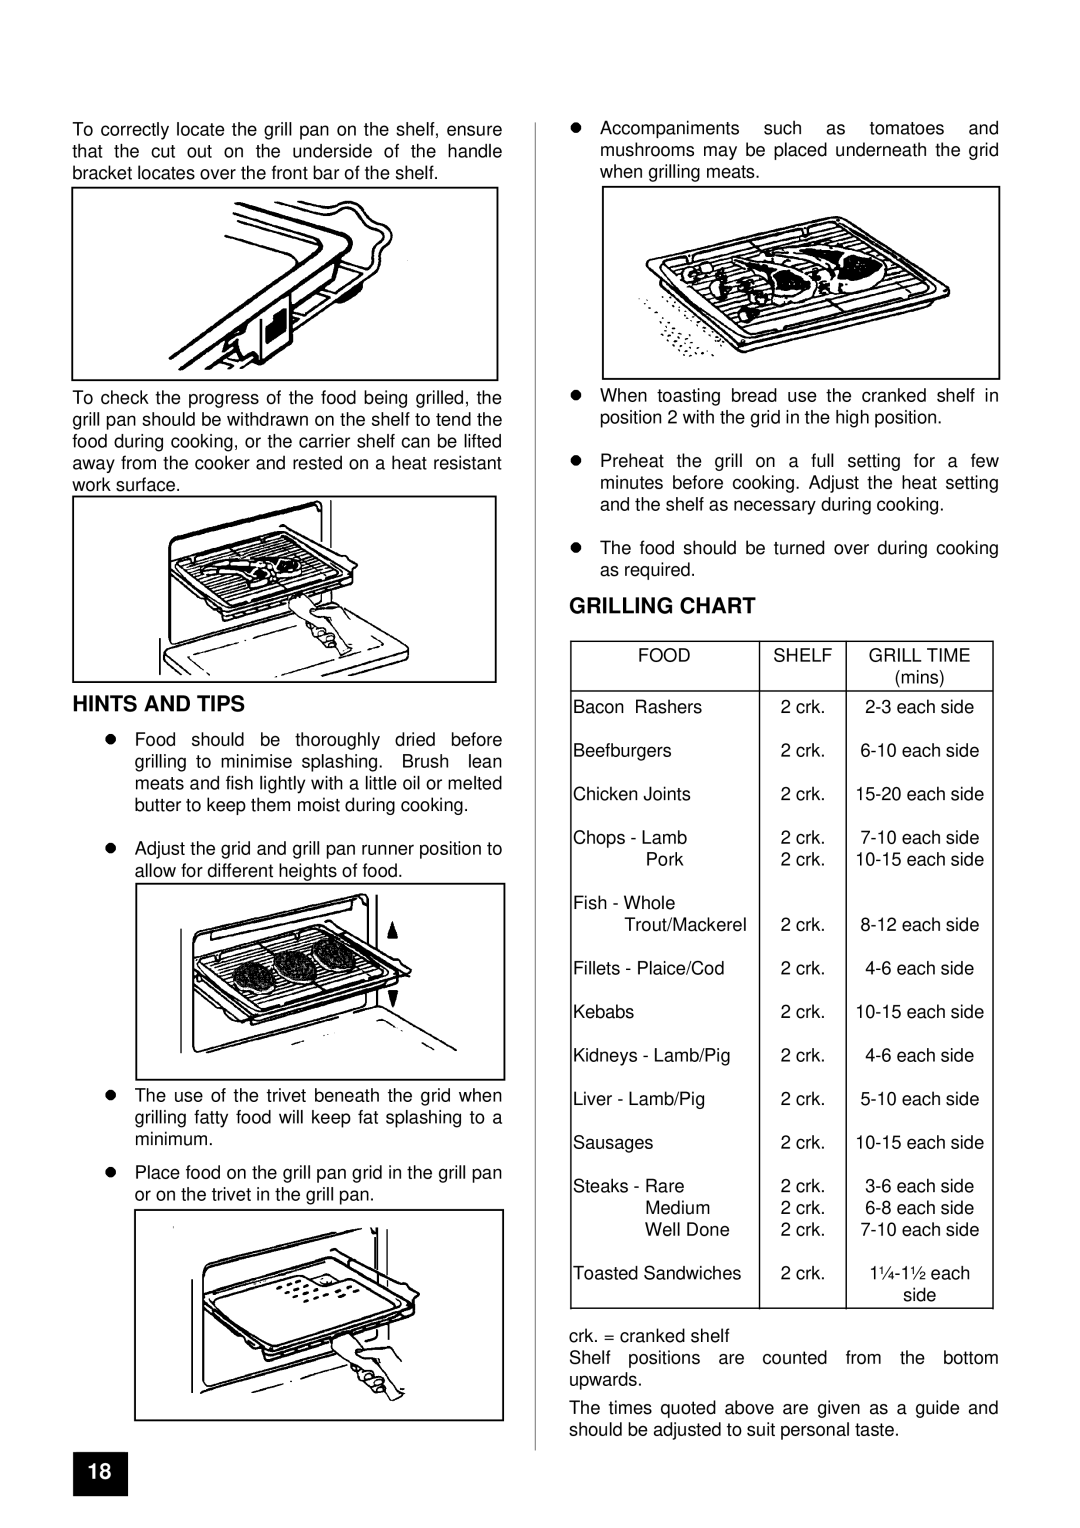 Tricity Bendix SB 461 installation instructions Grilling Chart, Food Shelf Grill Time 